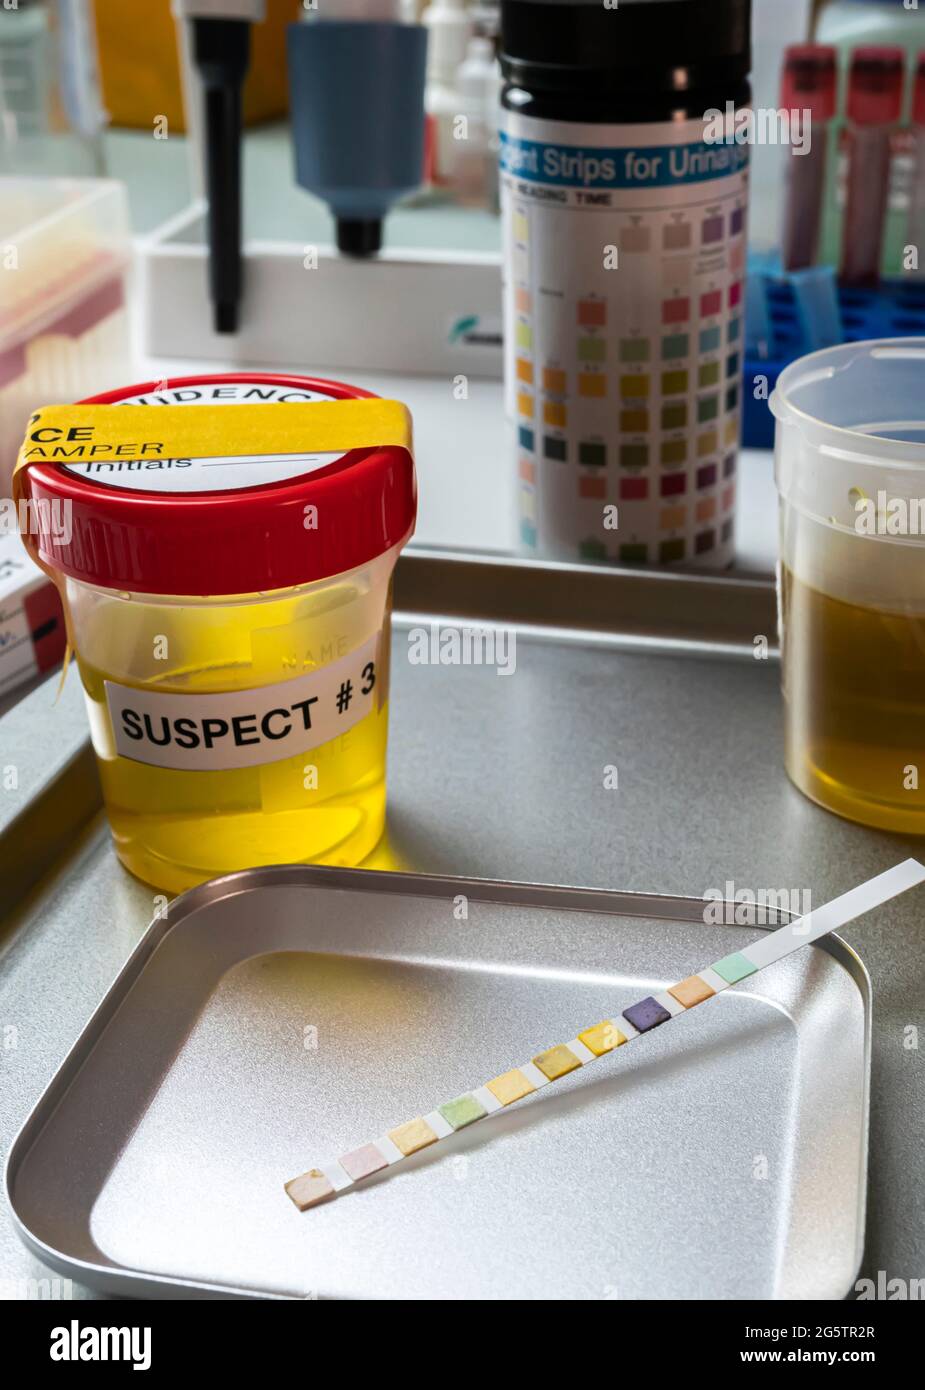 Urine analysis result of murder suspect in crime lab, concept image Stock Photo